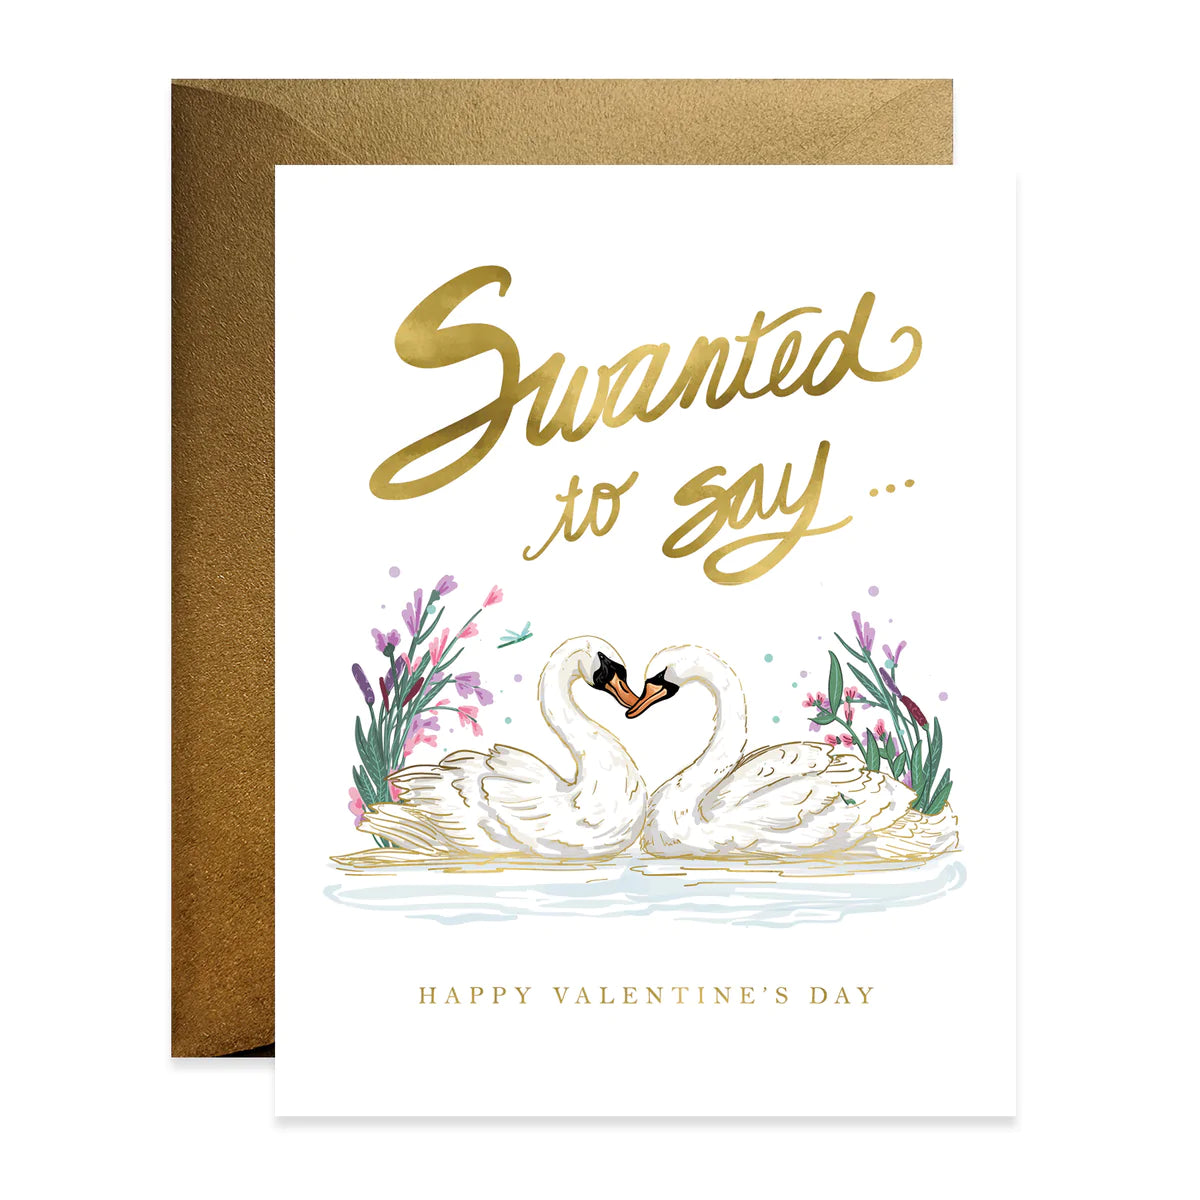 Swanted to Say Vday Card